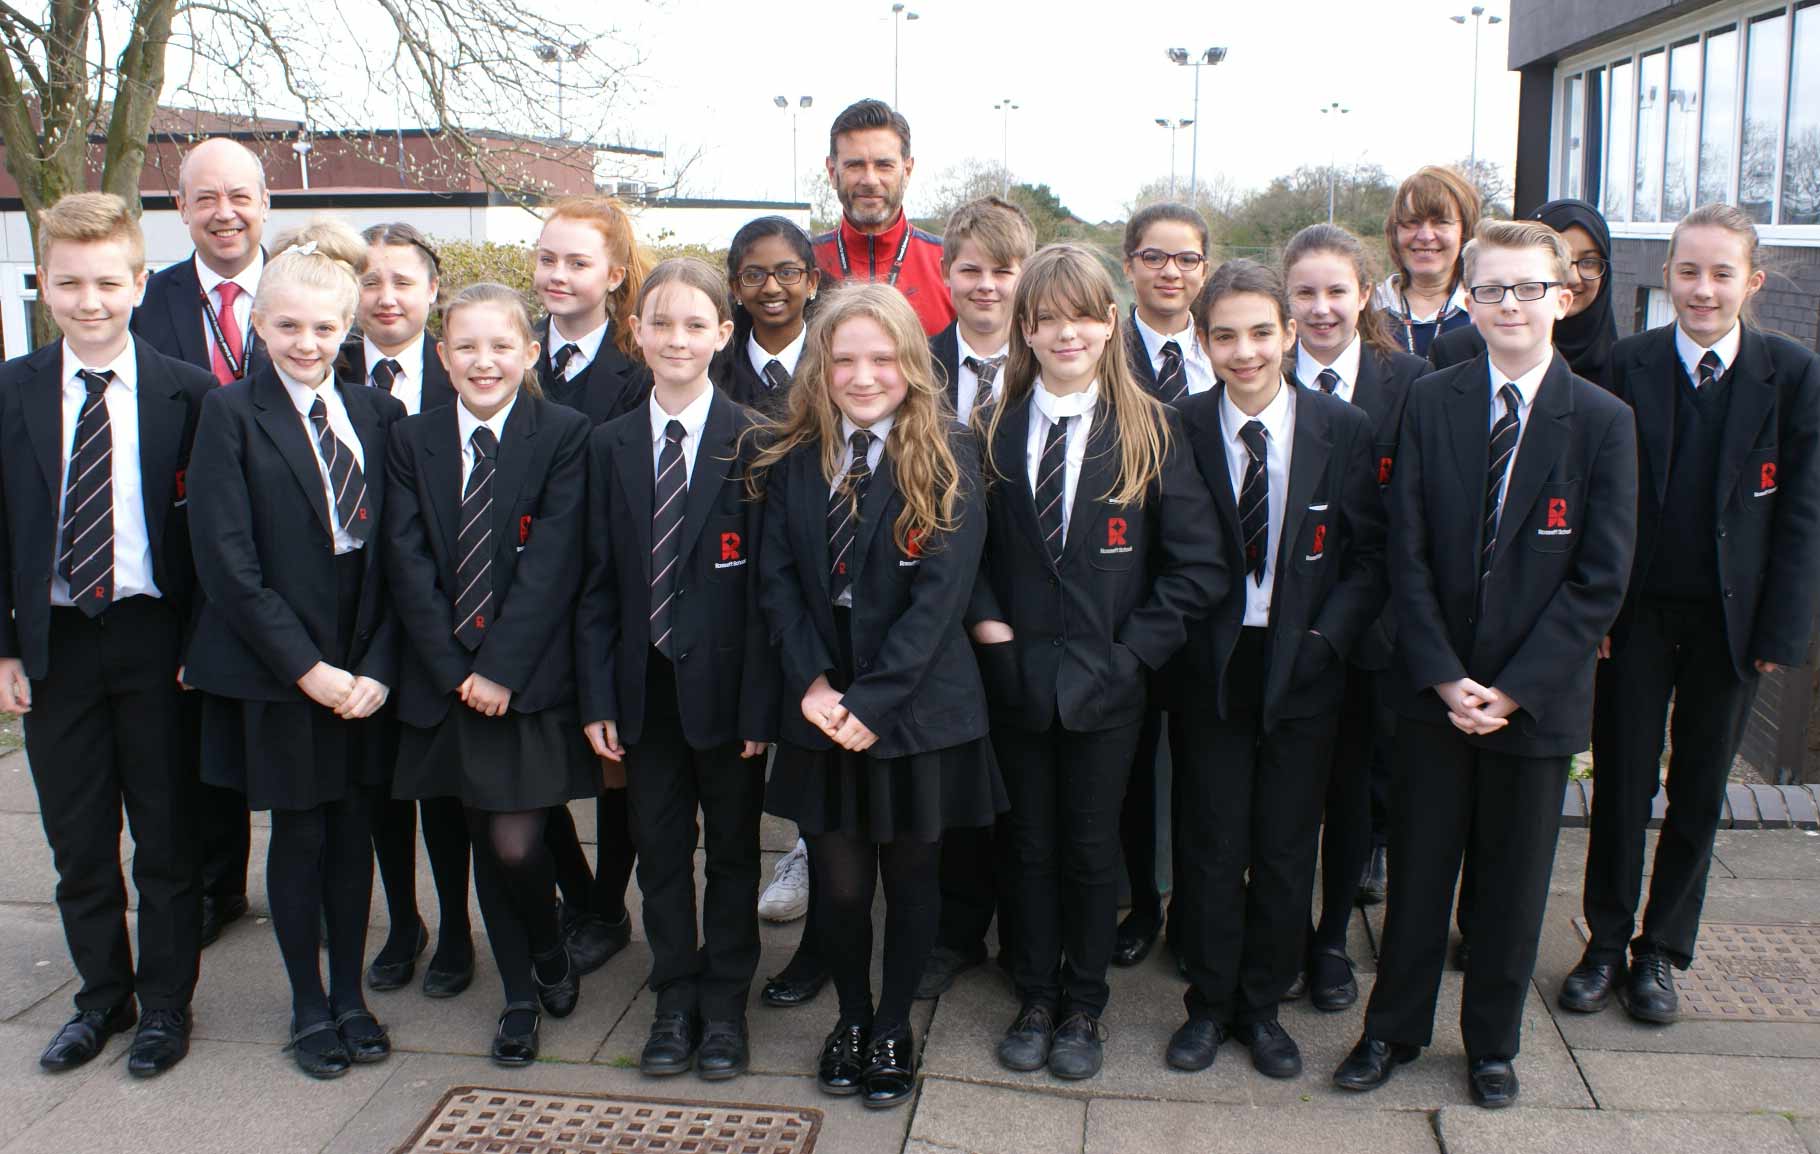 Year 7 students celebrate academic progress with Director of Learning Mike Sweetman (centre), Student Support Officer Debbie Banyard (right) and Head of Pastoral Care Dave Royles